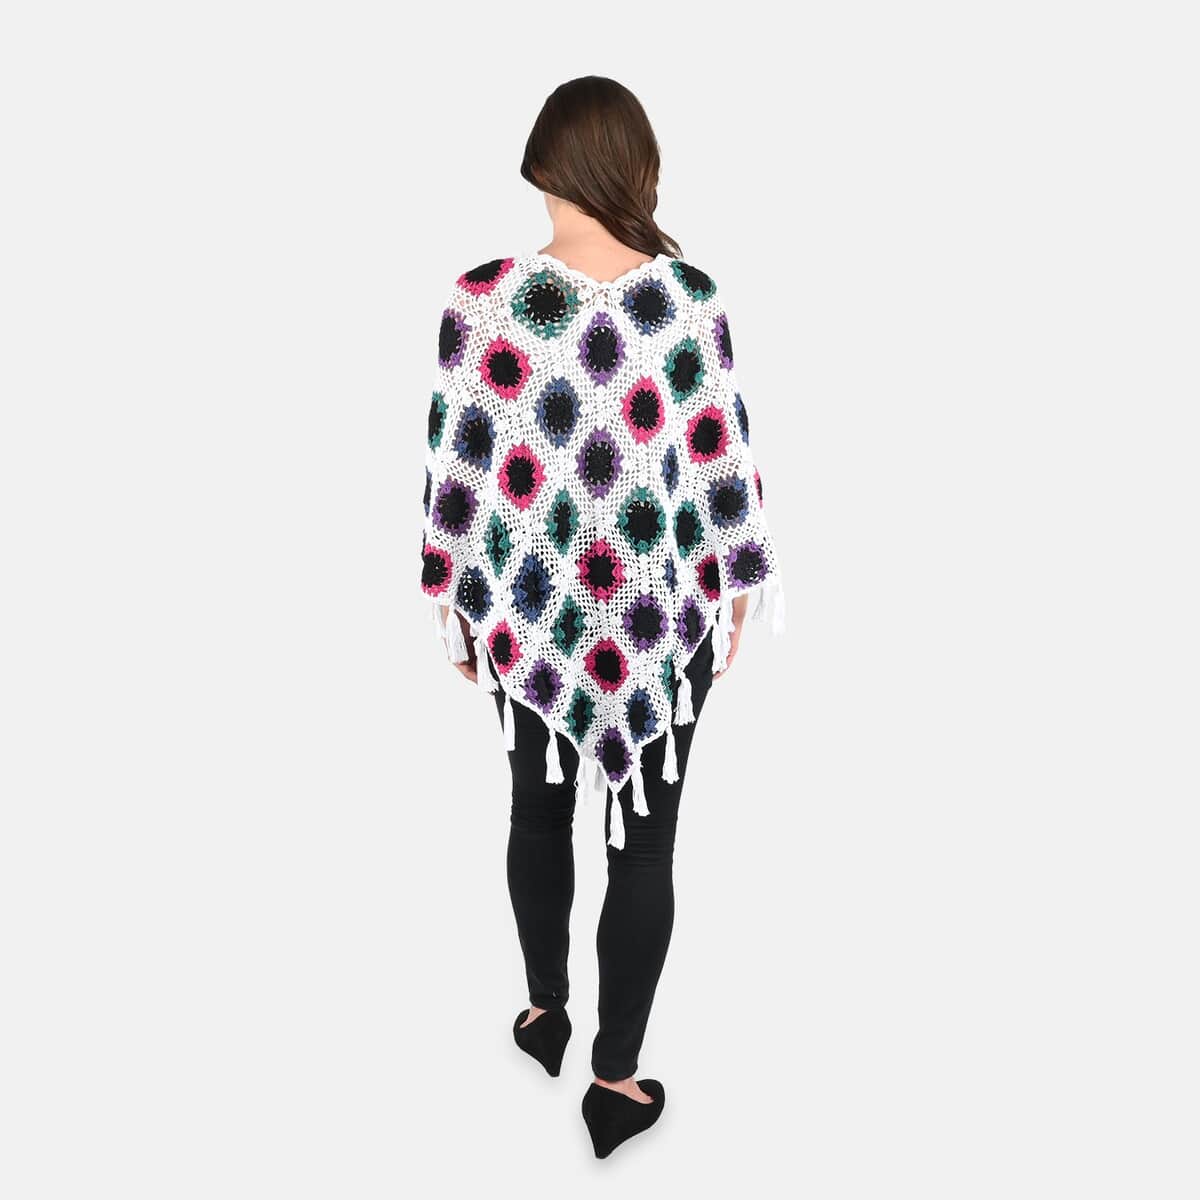 Passage Women's Cotton Poncho Crochet White and Multi Color Square Poncho (One Size) image number 1